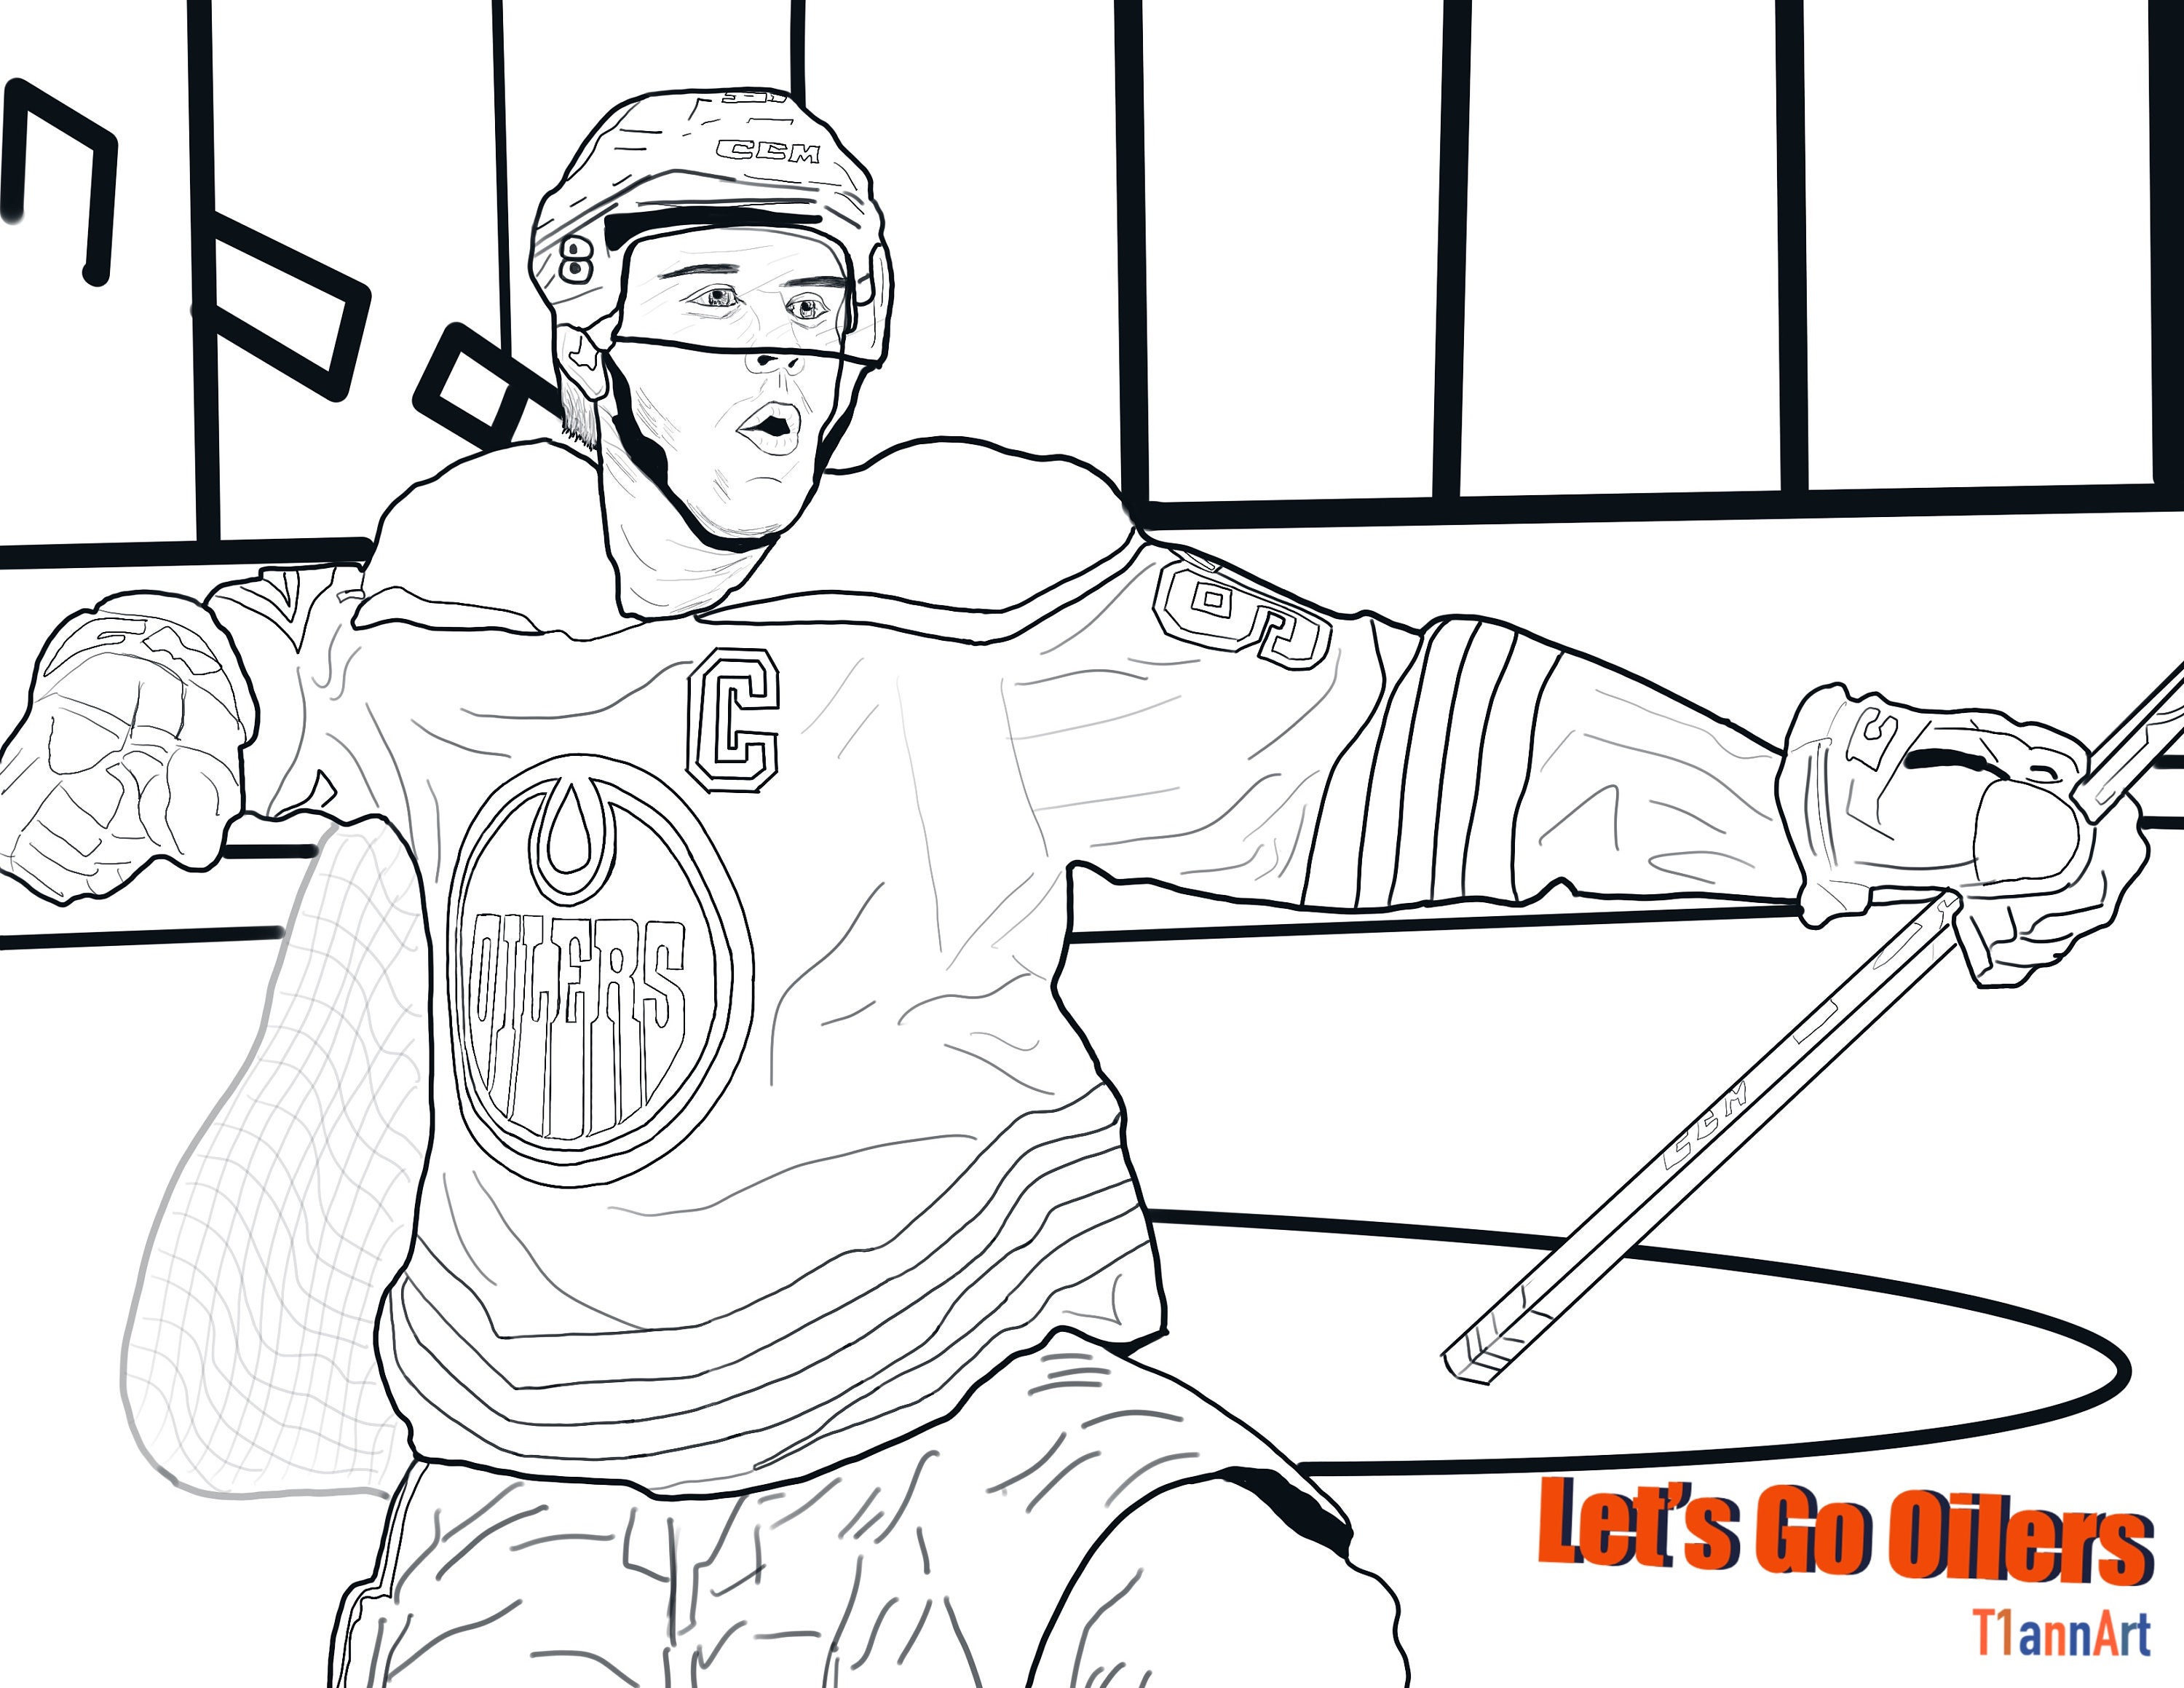 Enjoy the Game with Hockey Coloring Pages